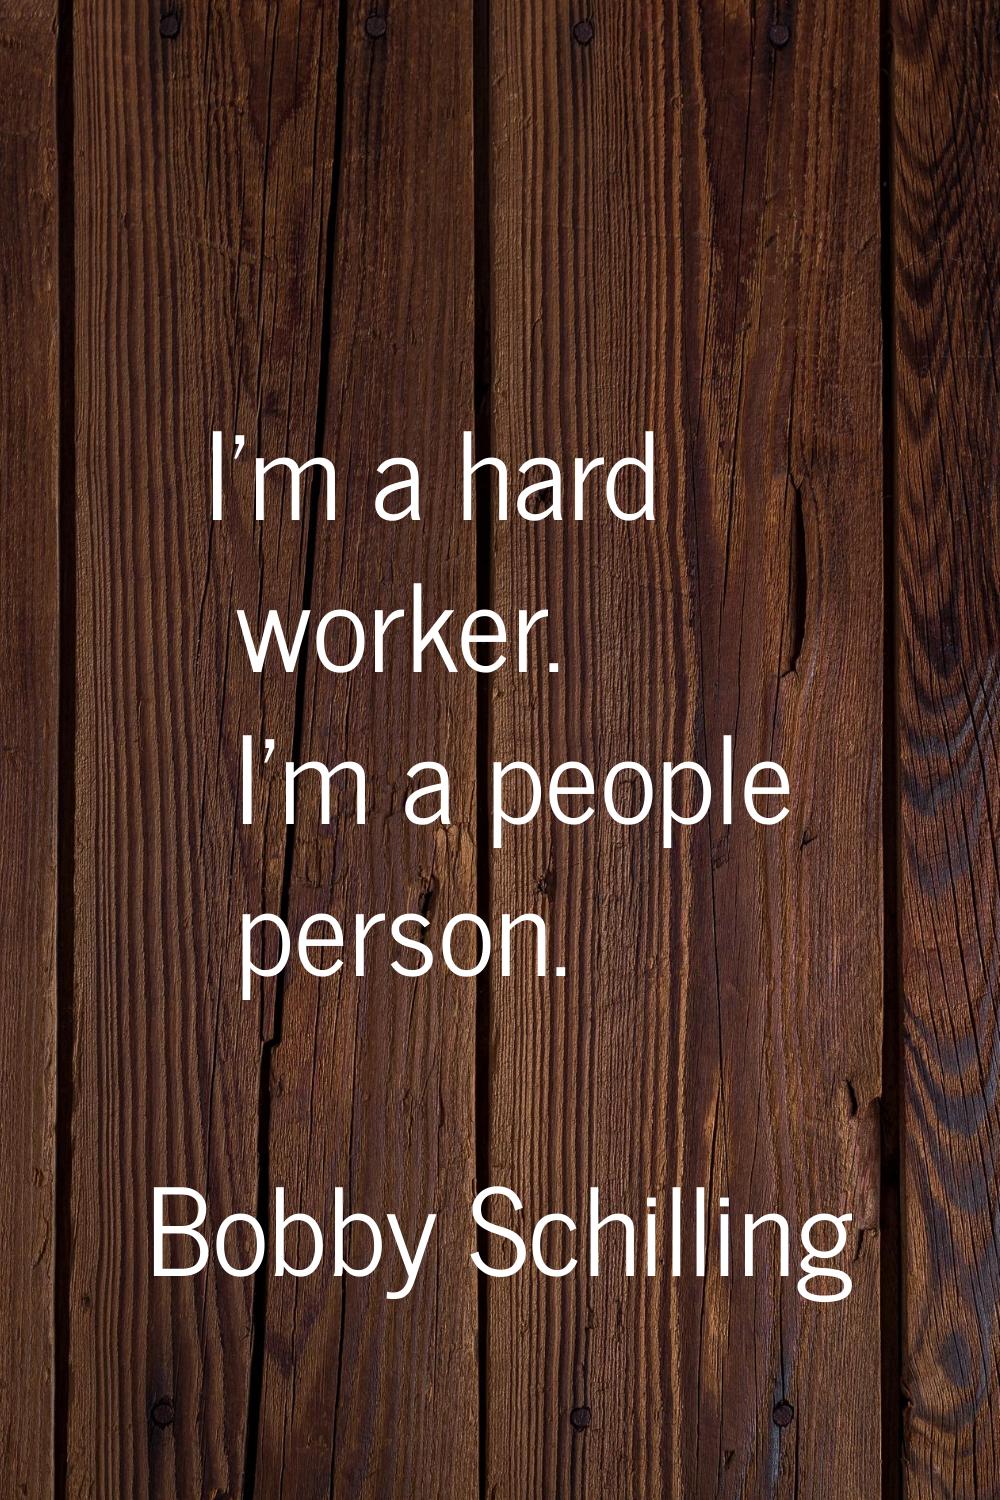 I'm a hard worker. I'm a people person.